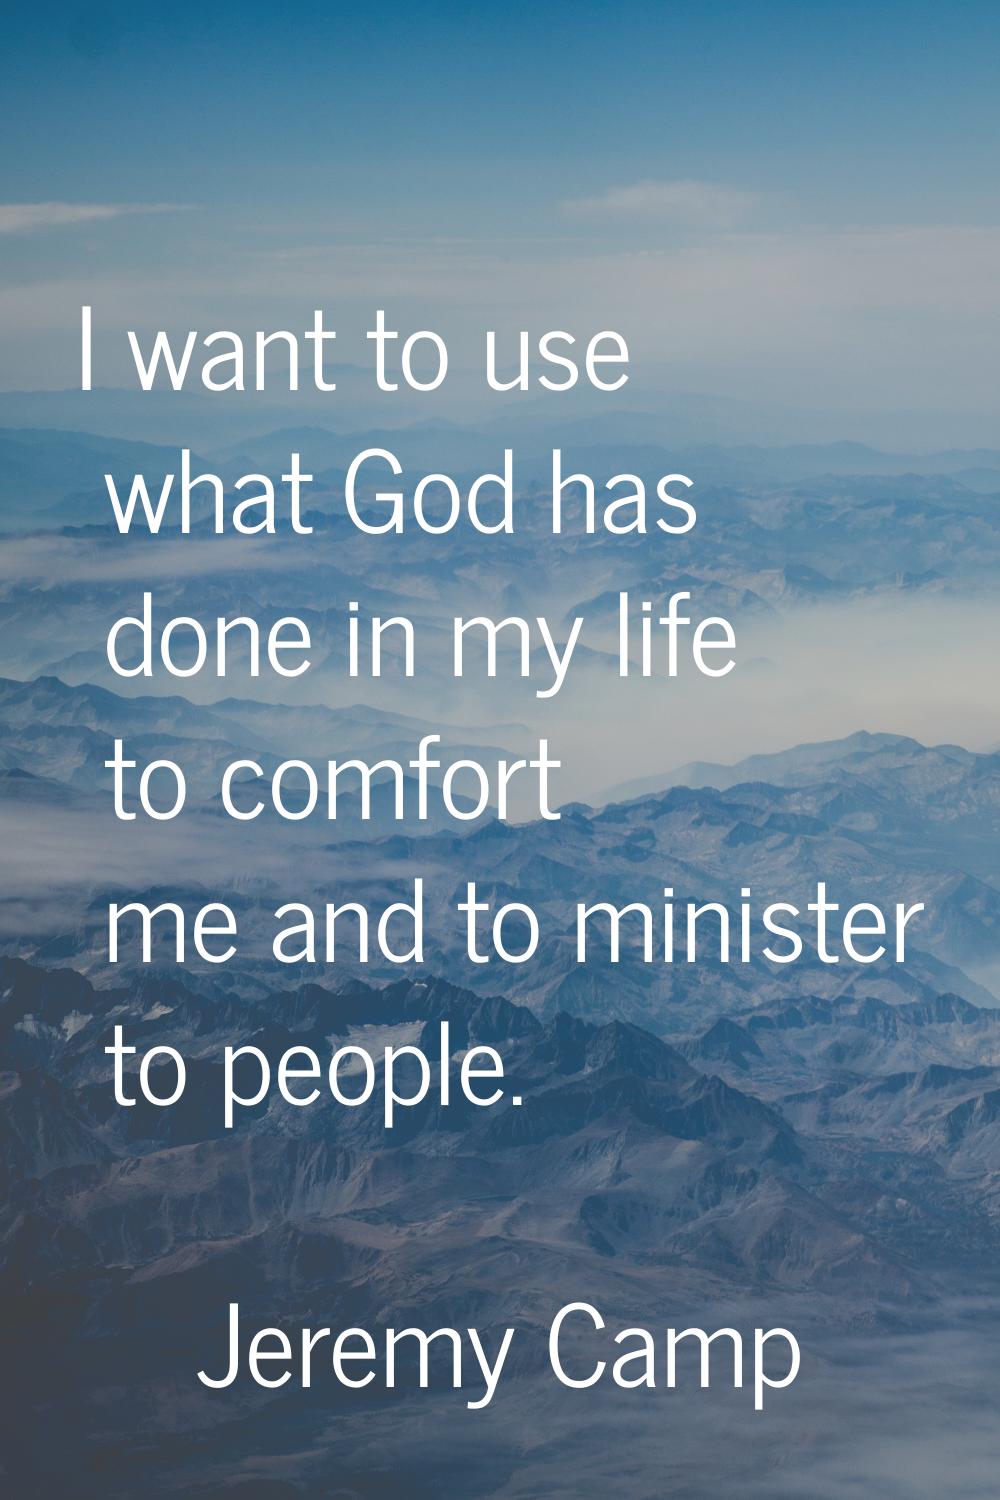 I want to use what God has done in my life to comfort me and to minister to people.